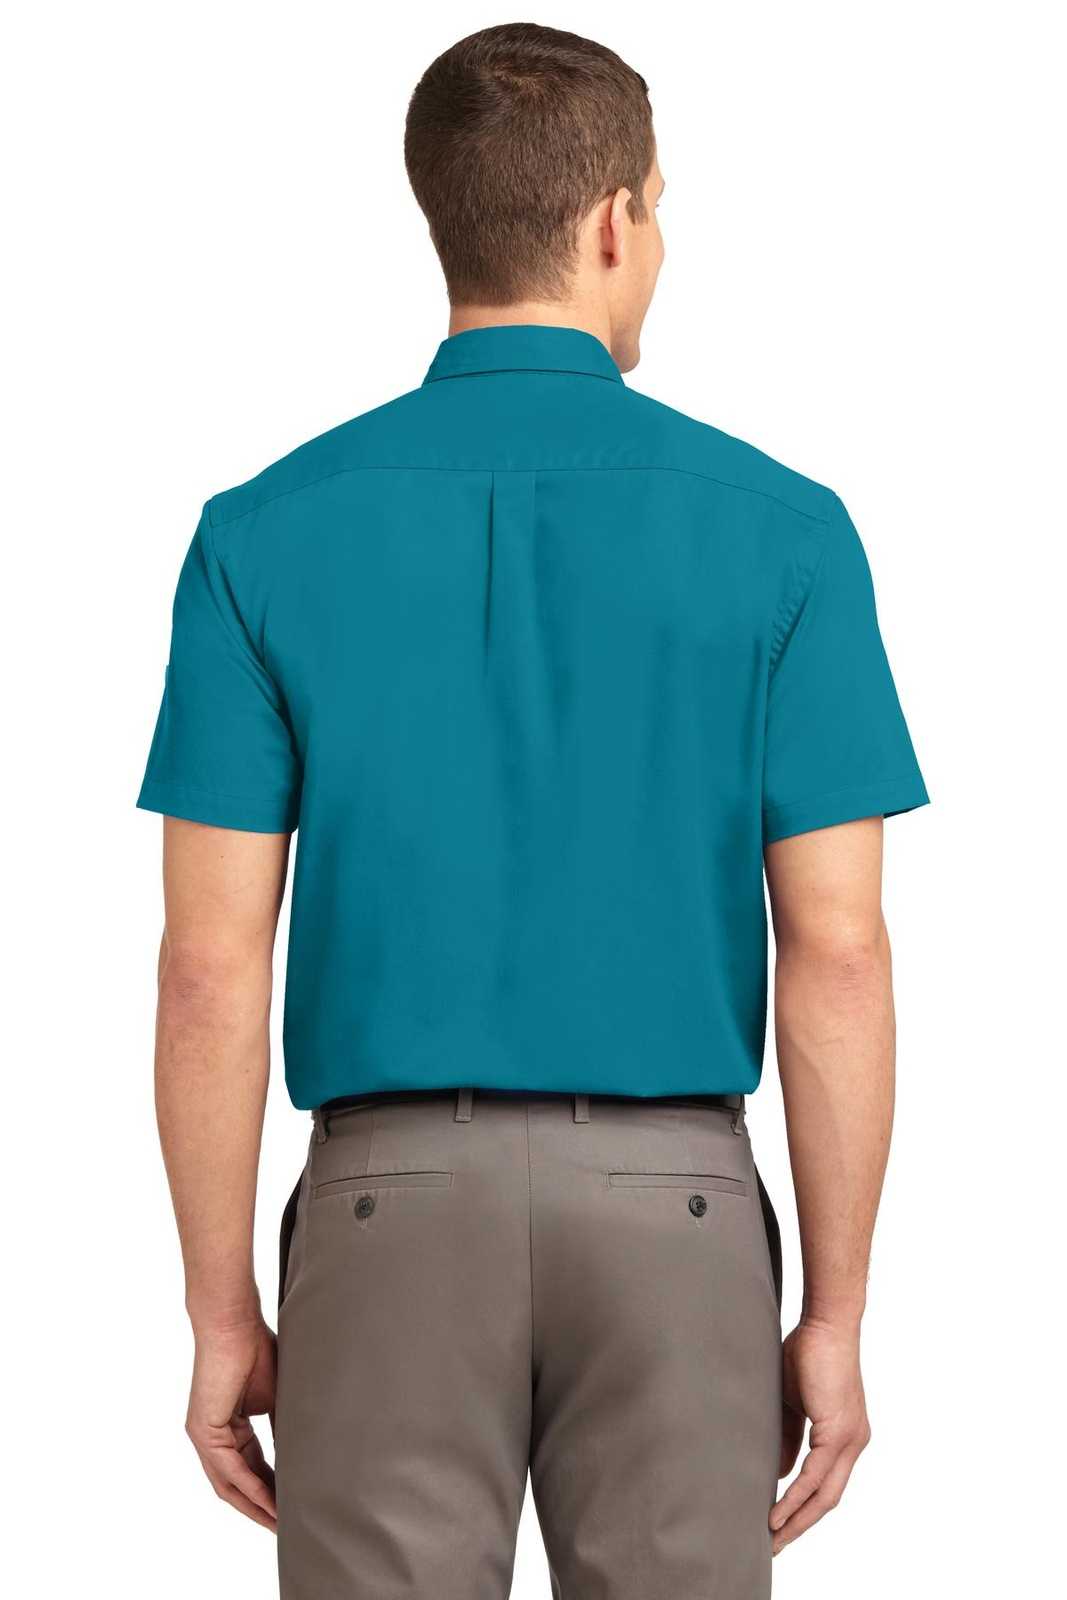 Port Authority S508 Short Sleeve Easy Care Shirt - Teal Green - HIT a Double - 1